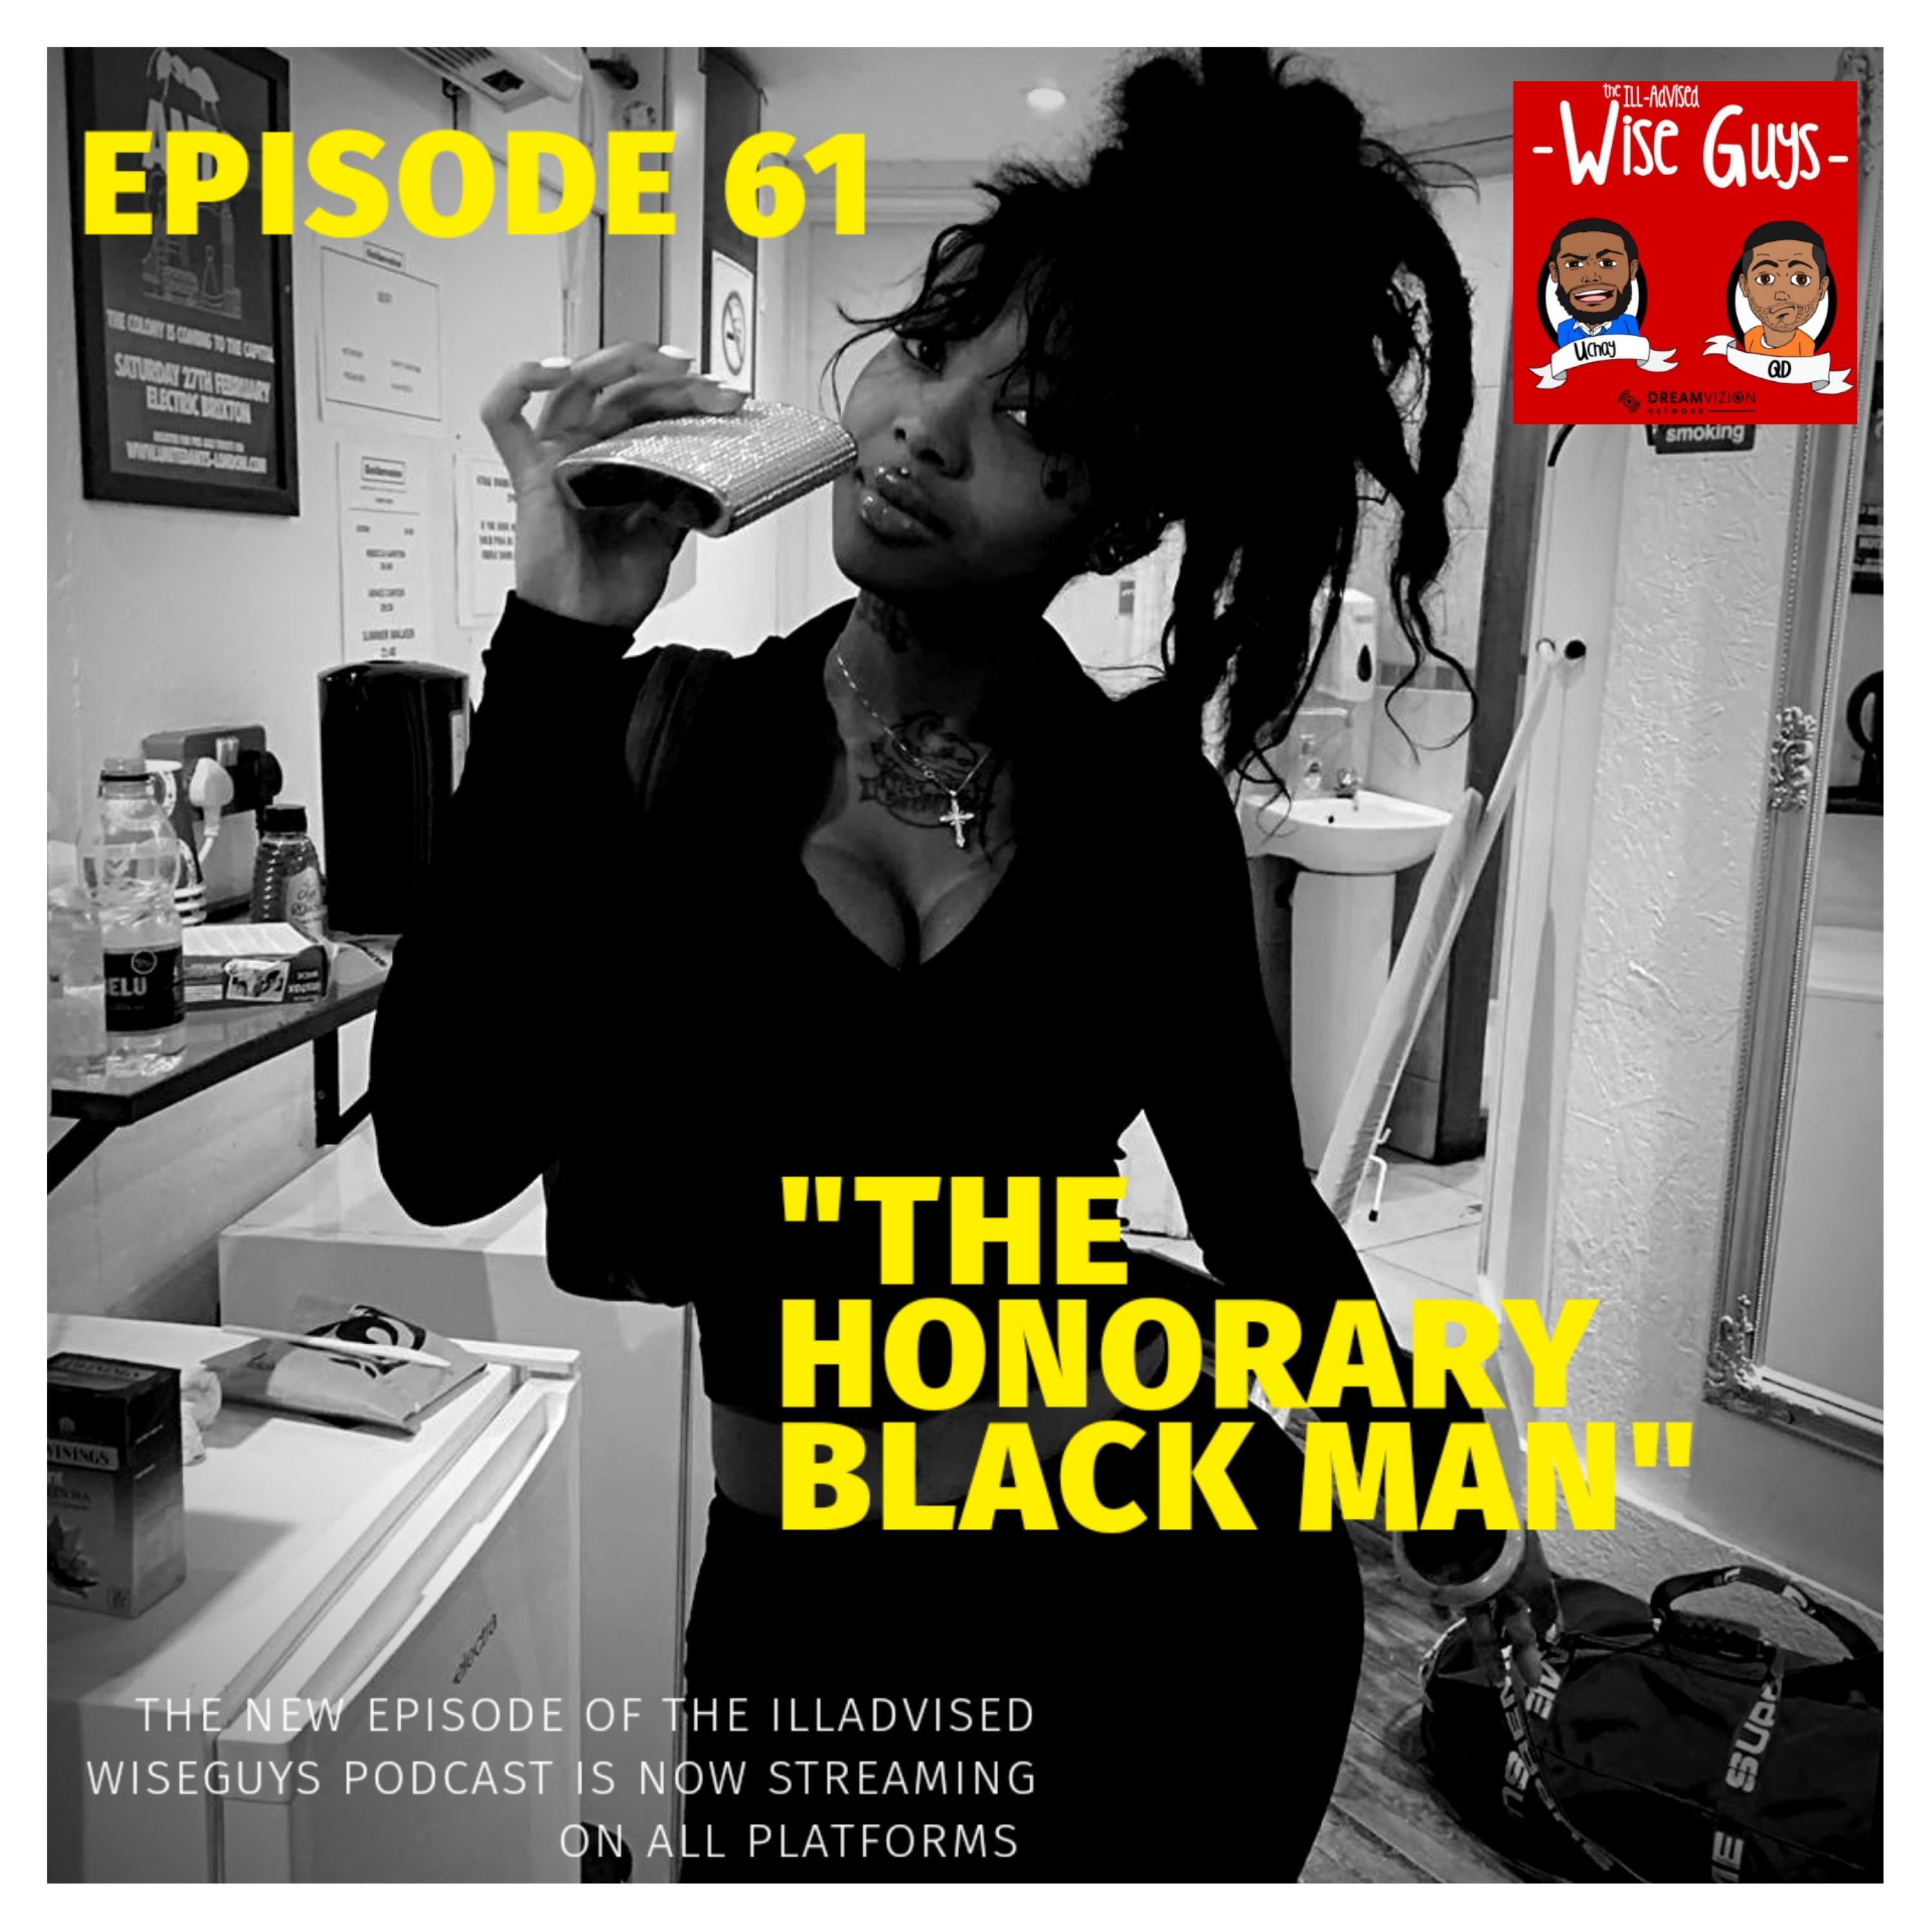 Episode 61 - "The Honorary Black Man..." Image